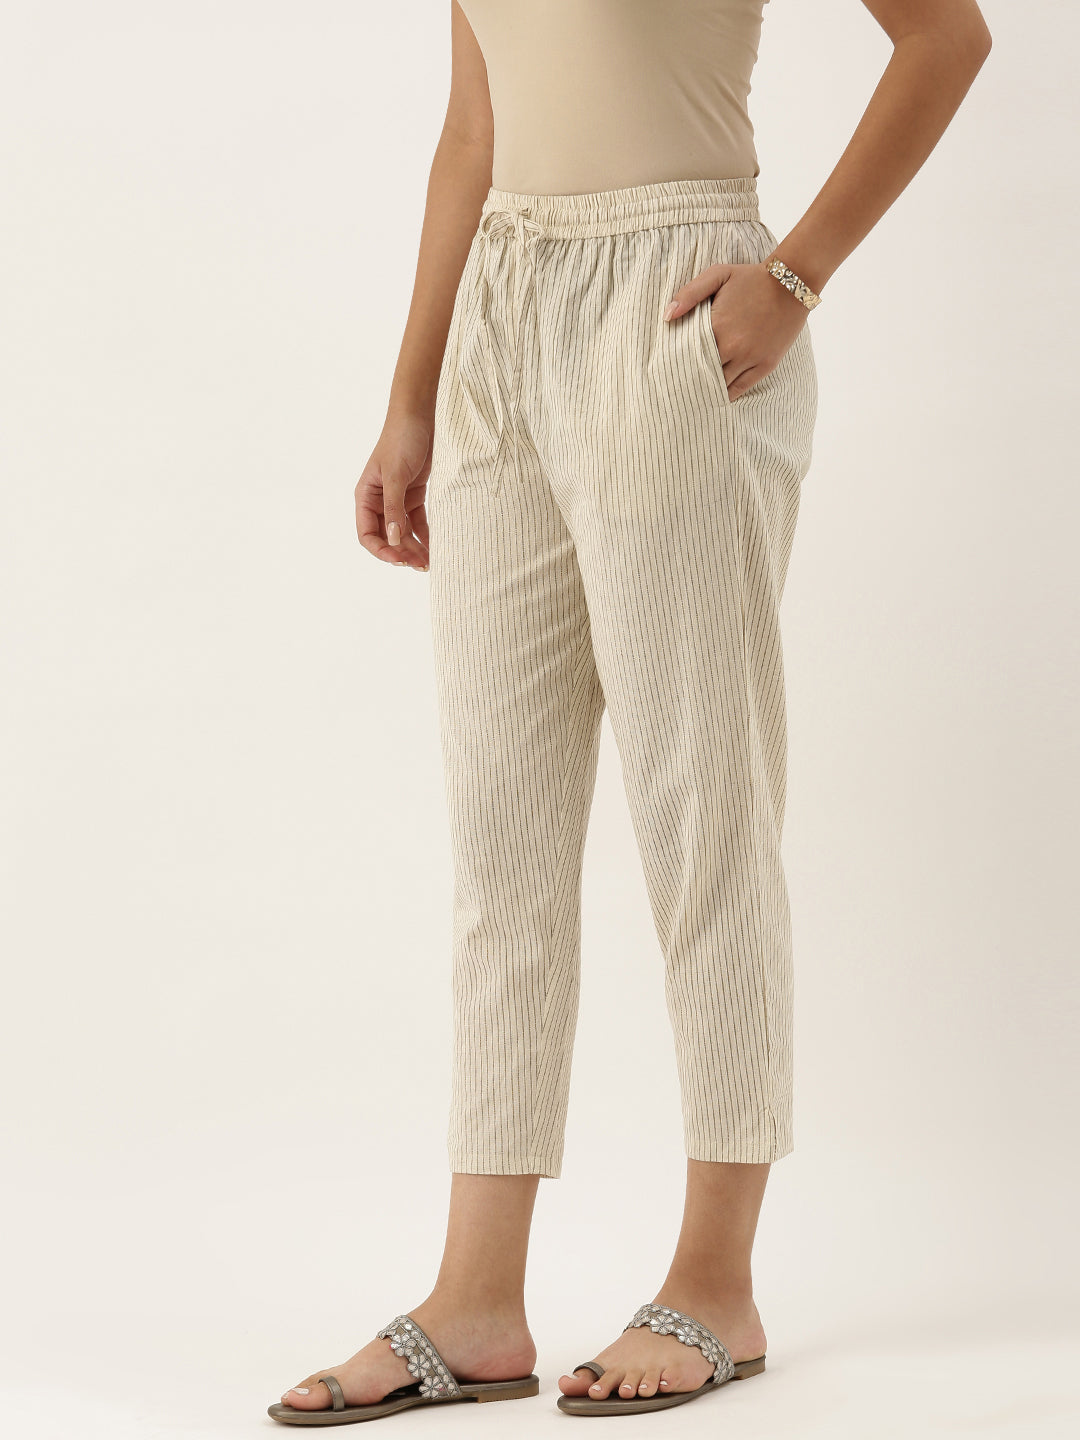 Norma Kamali Pencil Pant in Woods | REVOLVE